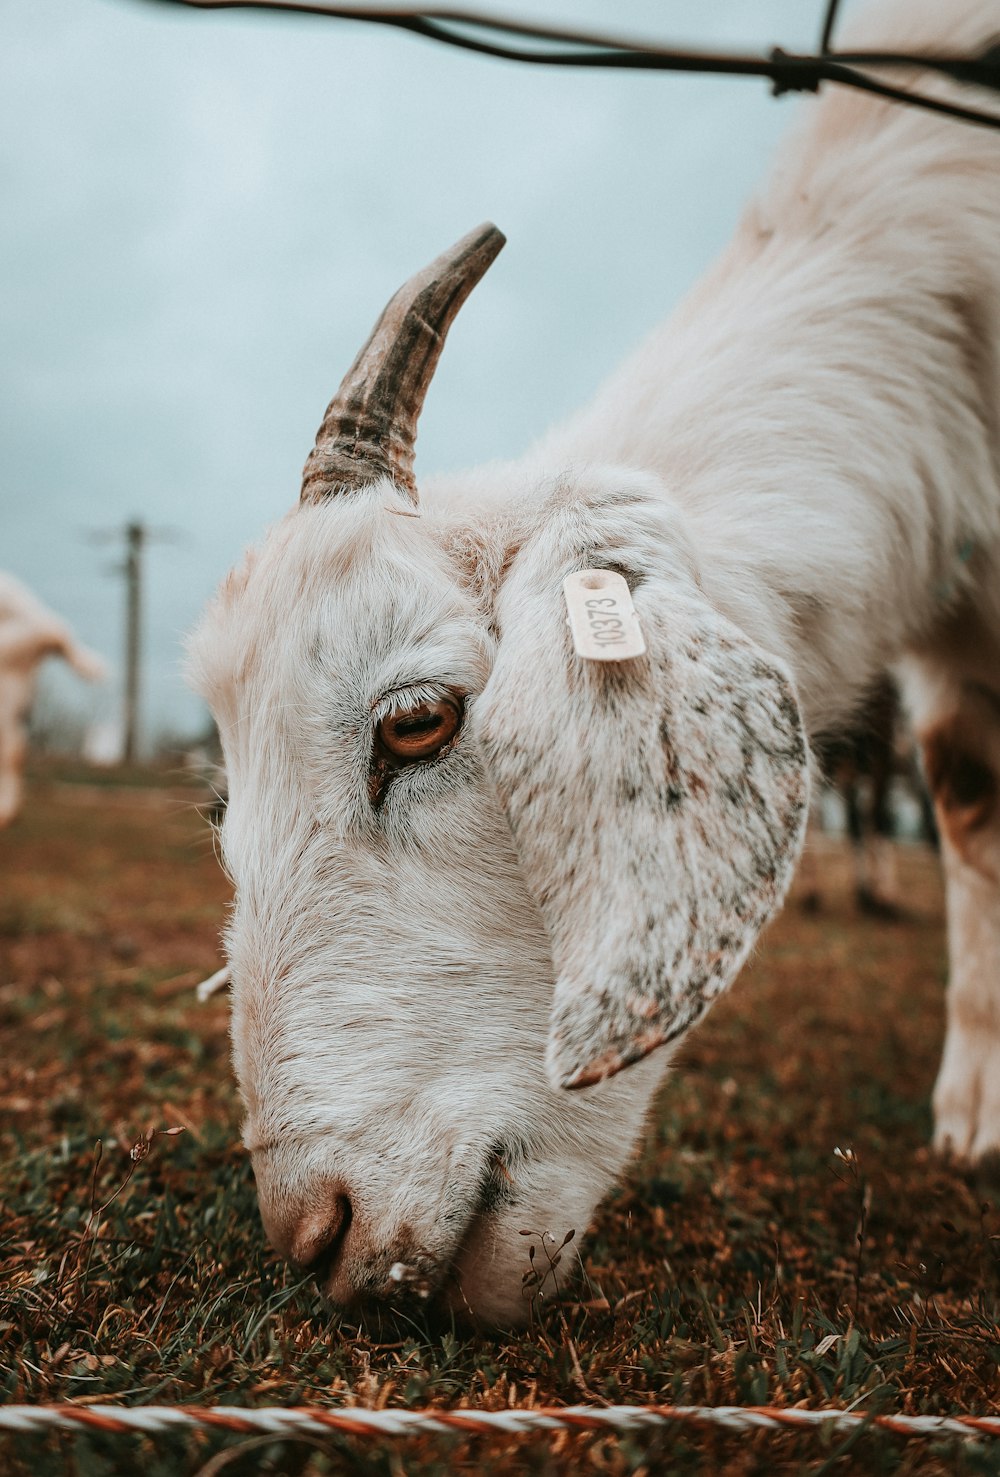 a close up of a goat with a tag on it's ear